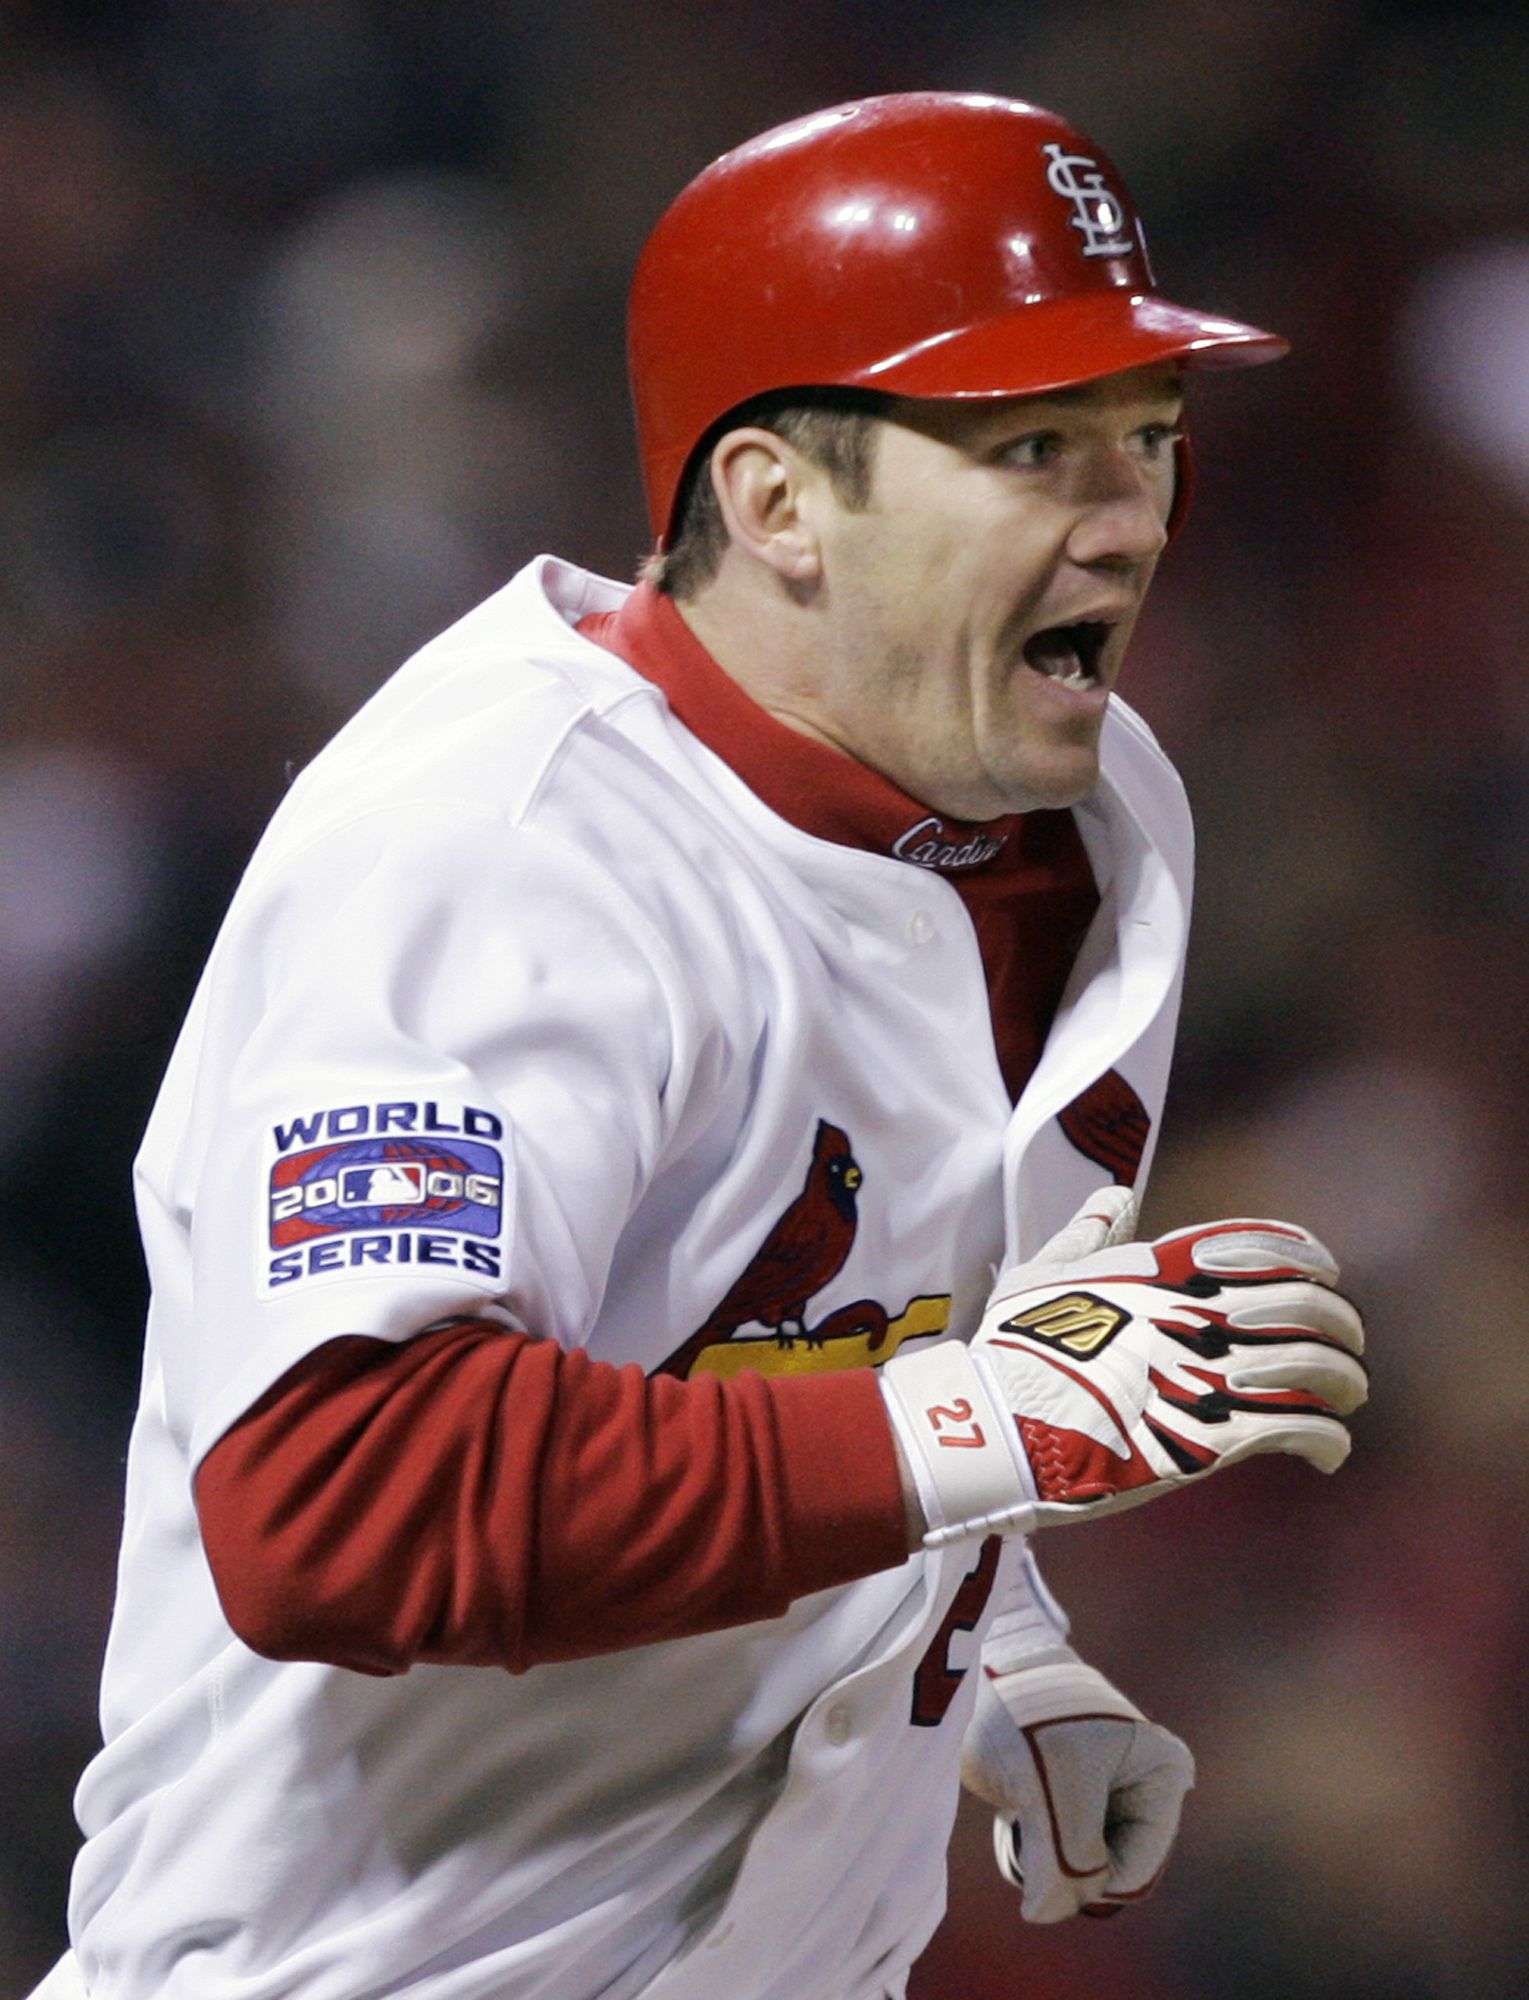 Scott Rolen, elected to Hall of Fame, changed Cincinnati Reds culture